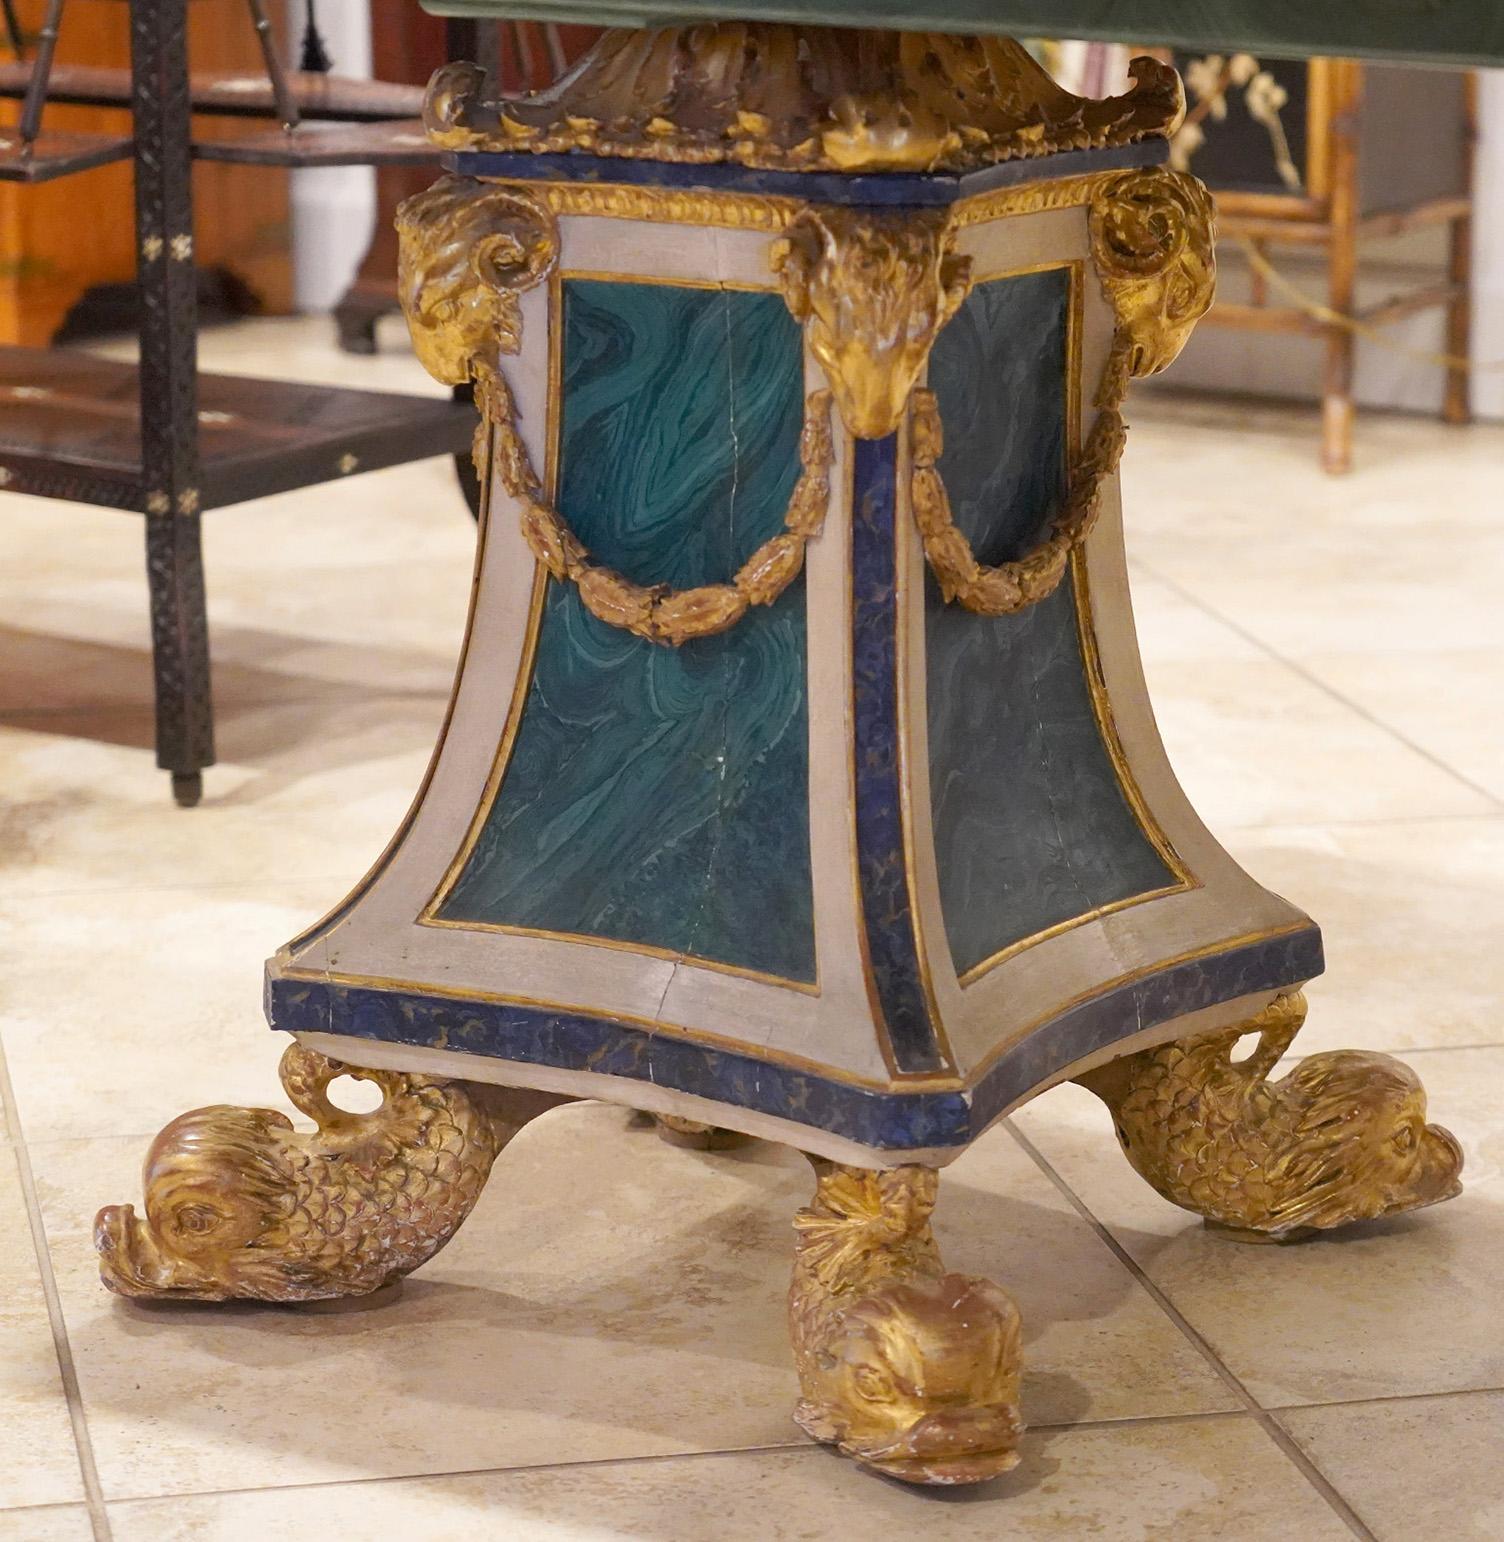 Measuring 36 x 102 inches this grand Italian dining table features a cast top clad with green Malachite centering a rectangular field of blue Lapis Lazuli. An intriguing color combination. The top rests on two 19th century baroque style pedestals